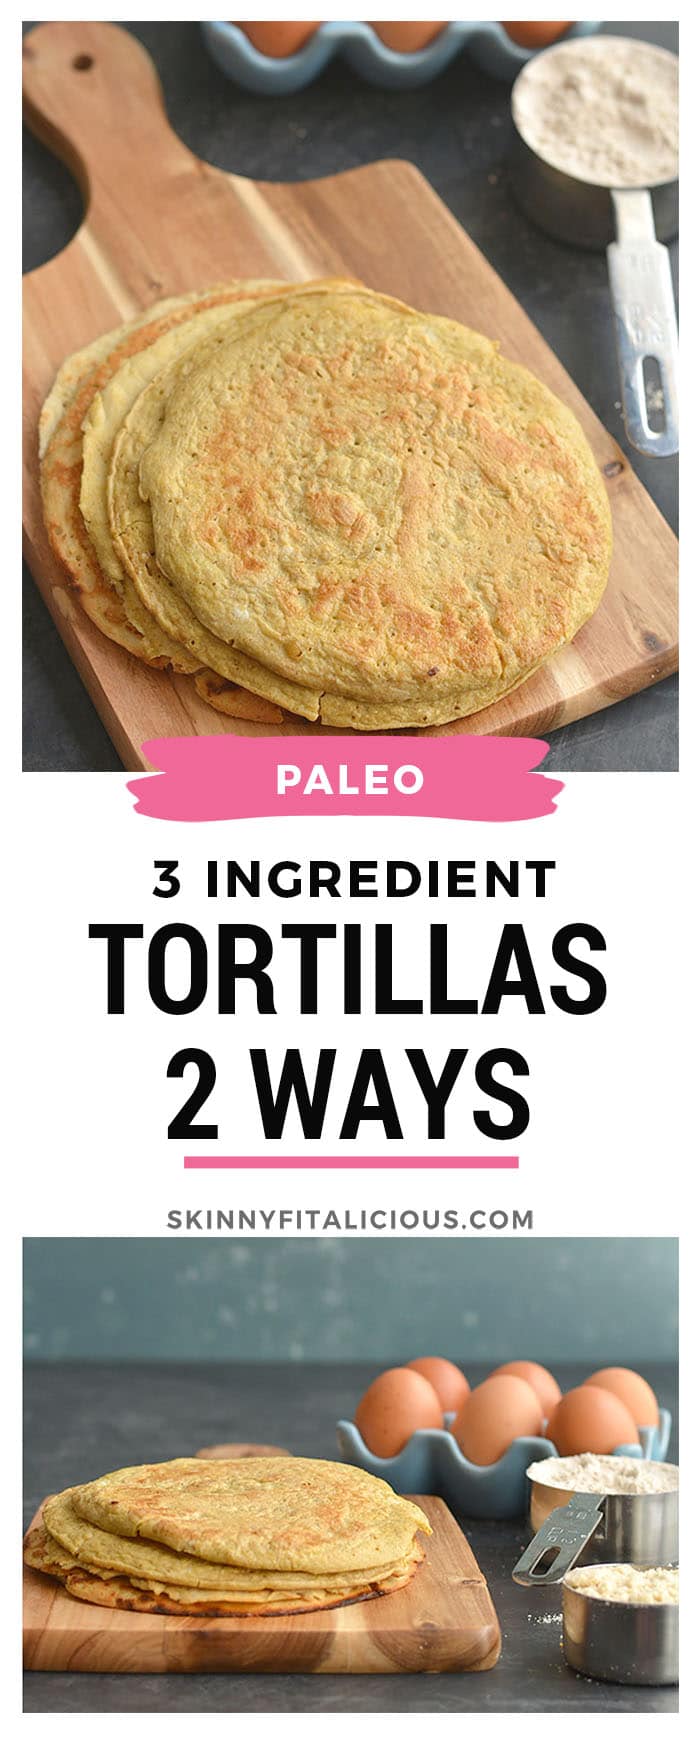 3 Ingredient Tortillas made 2 ways! These homemade tortillas are healthy, light, hardy and delicious! Only 3 everyday ingredients required and super simple to make. All you need is a blender and a skillet! Paleo and Gluten Free options included! 